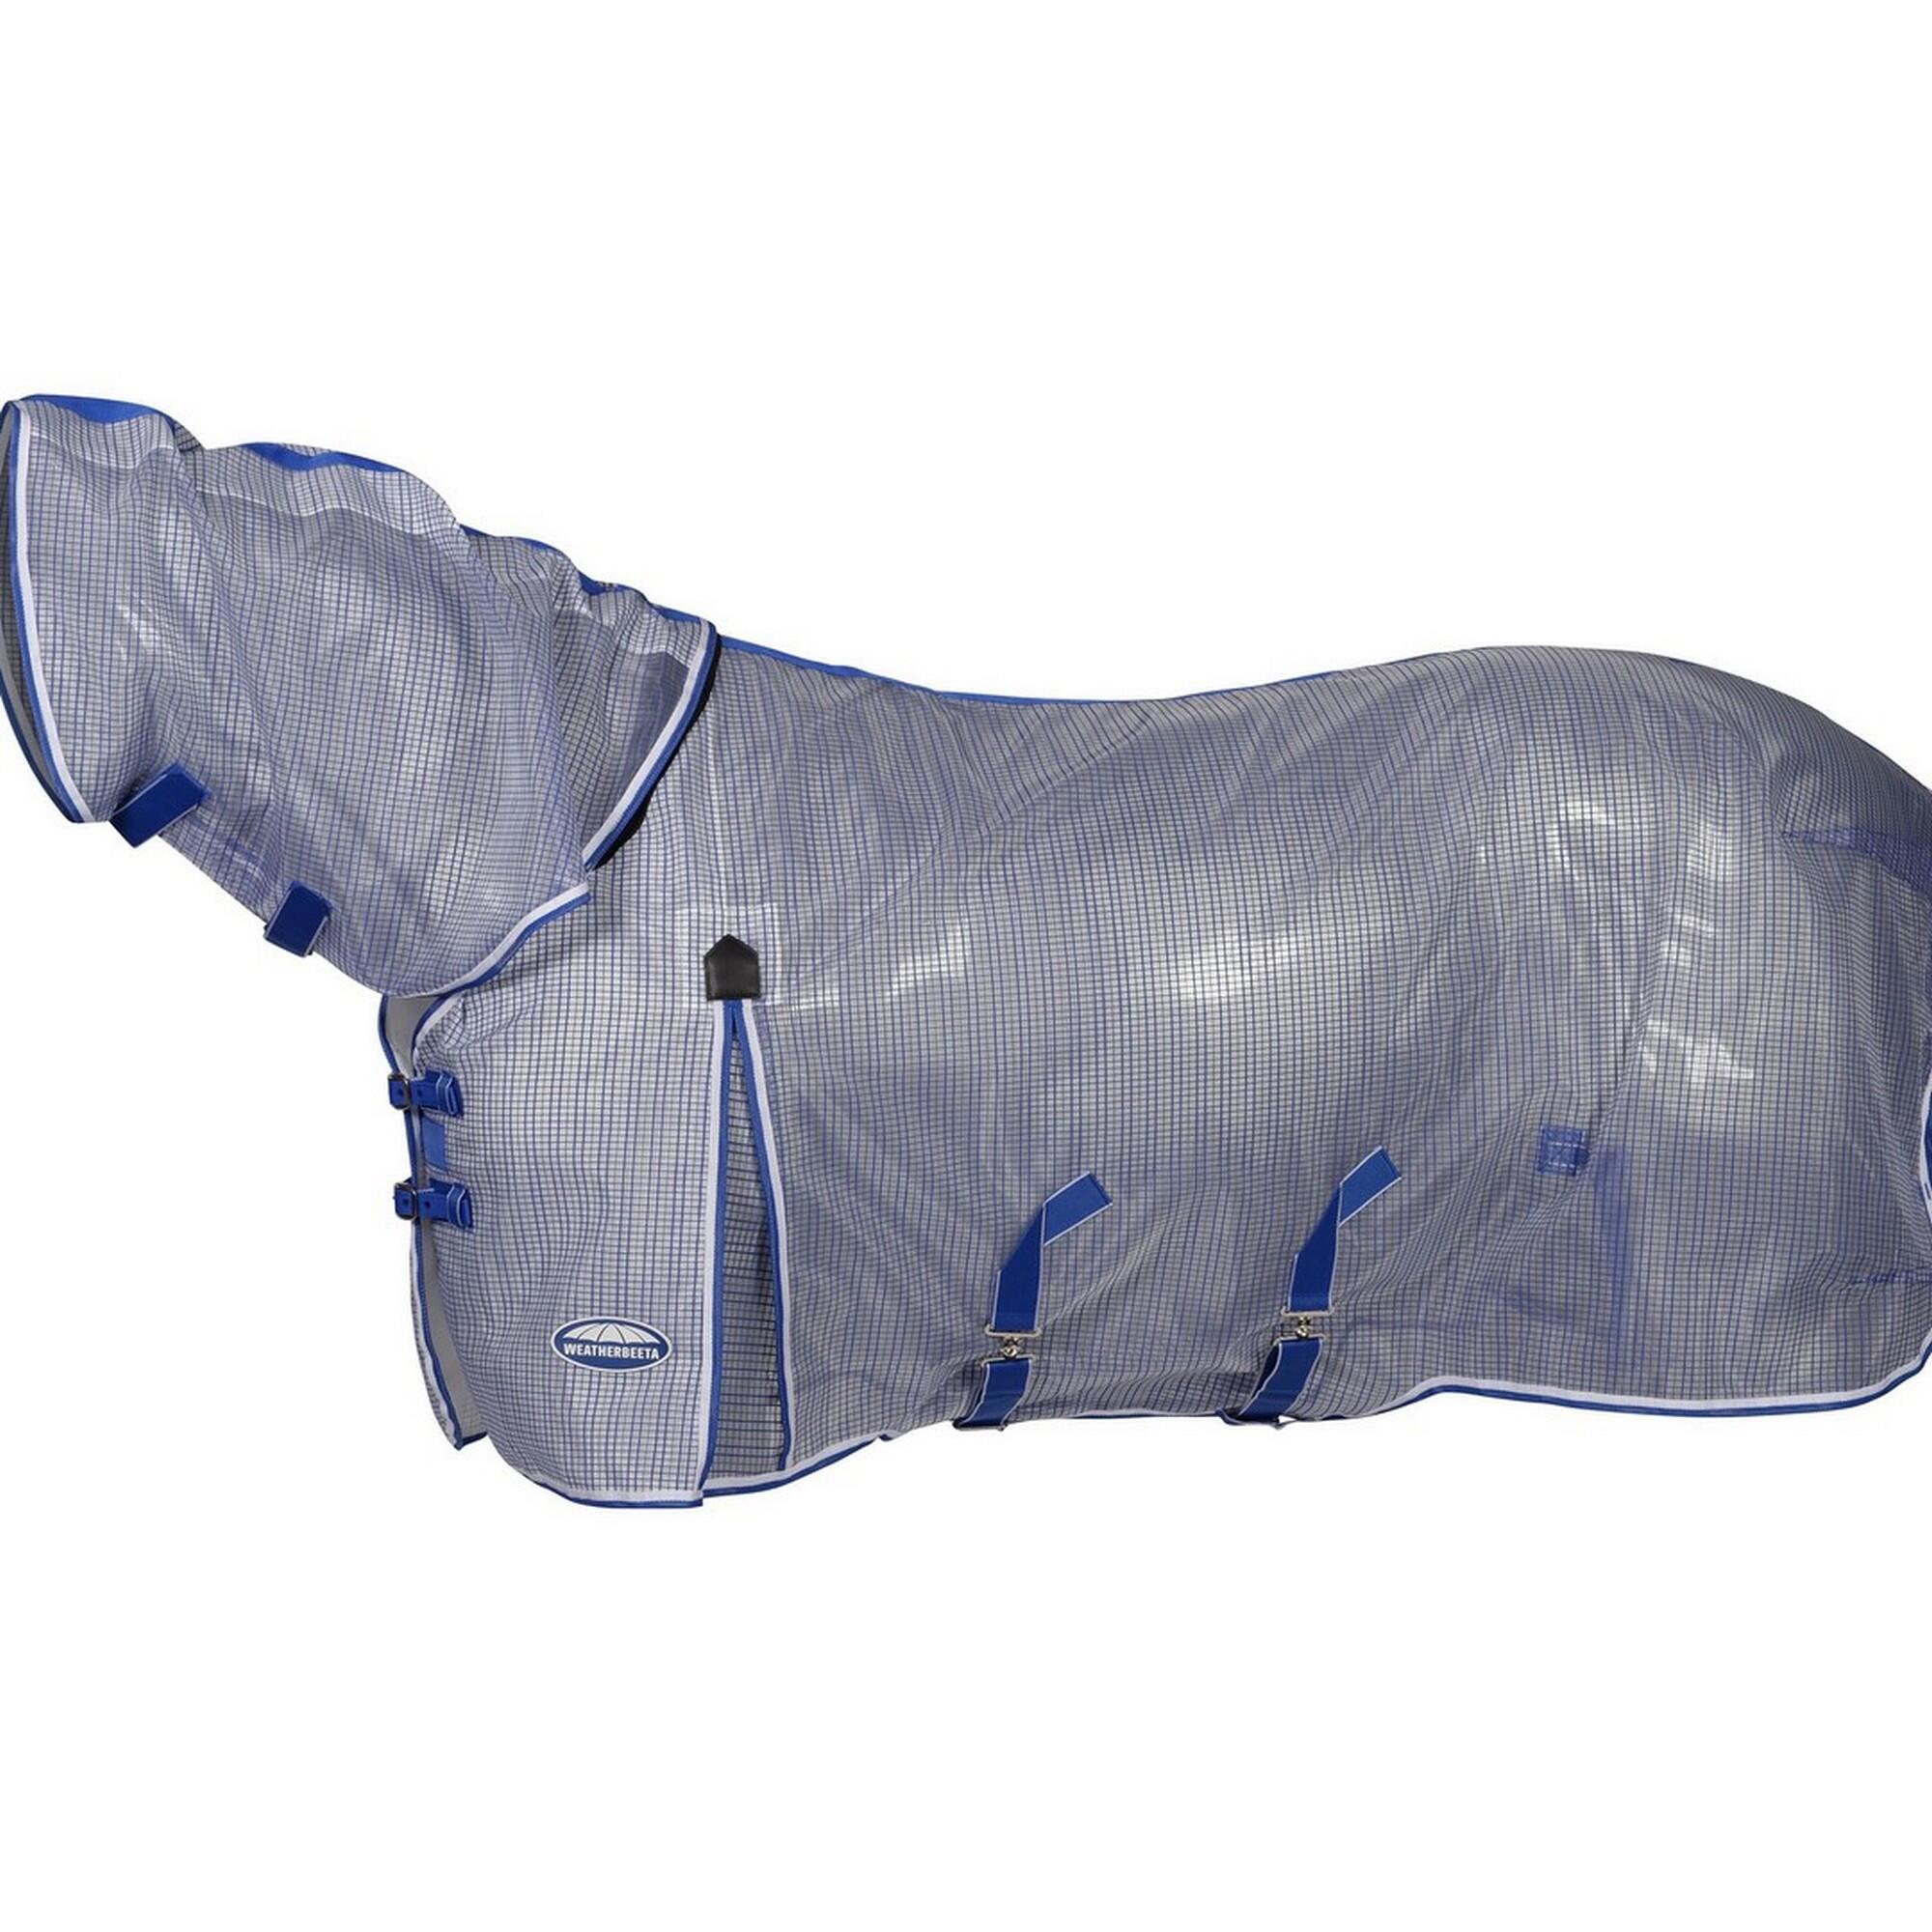 Comfitec Ripshield Plus Combo Neck Ultra Belly Wrap Horse Turnout Rug 1/4